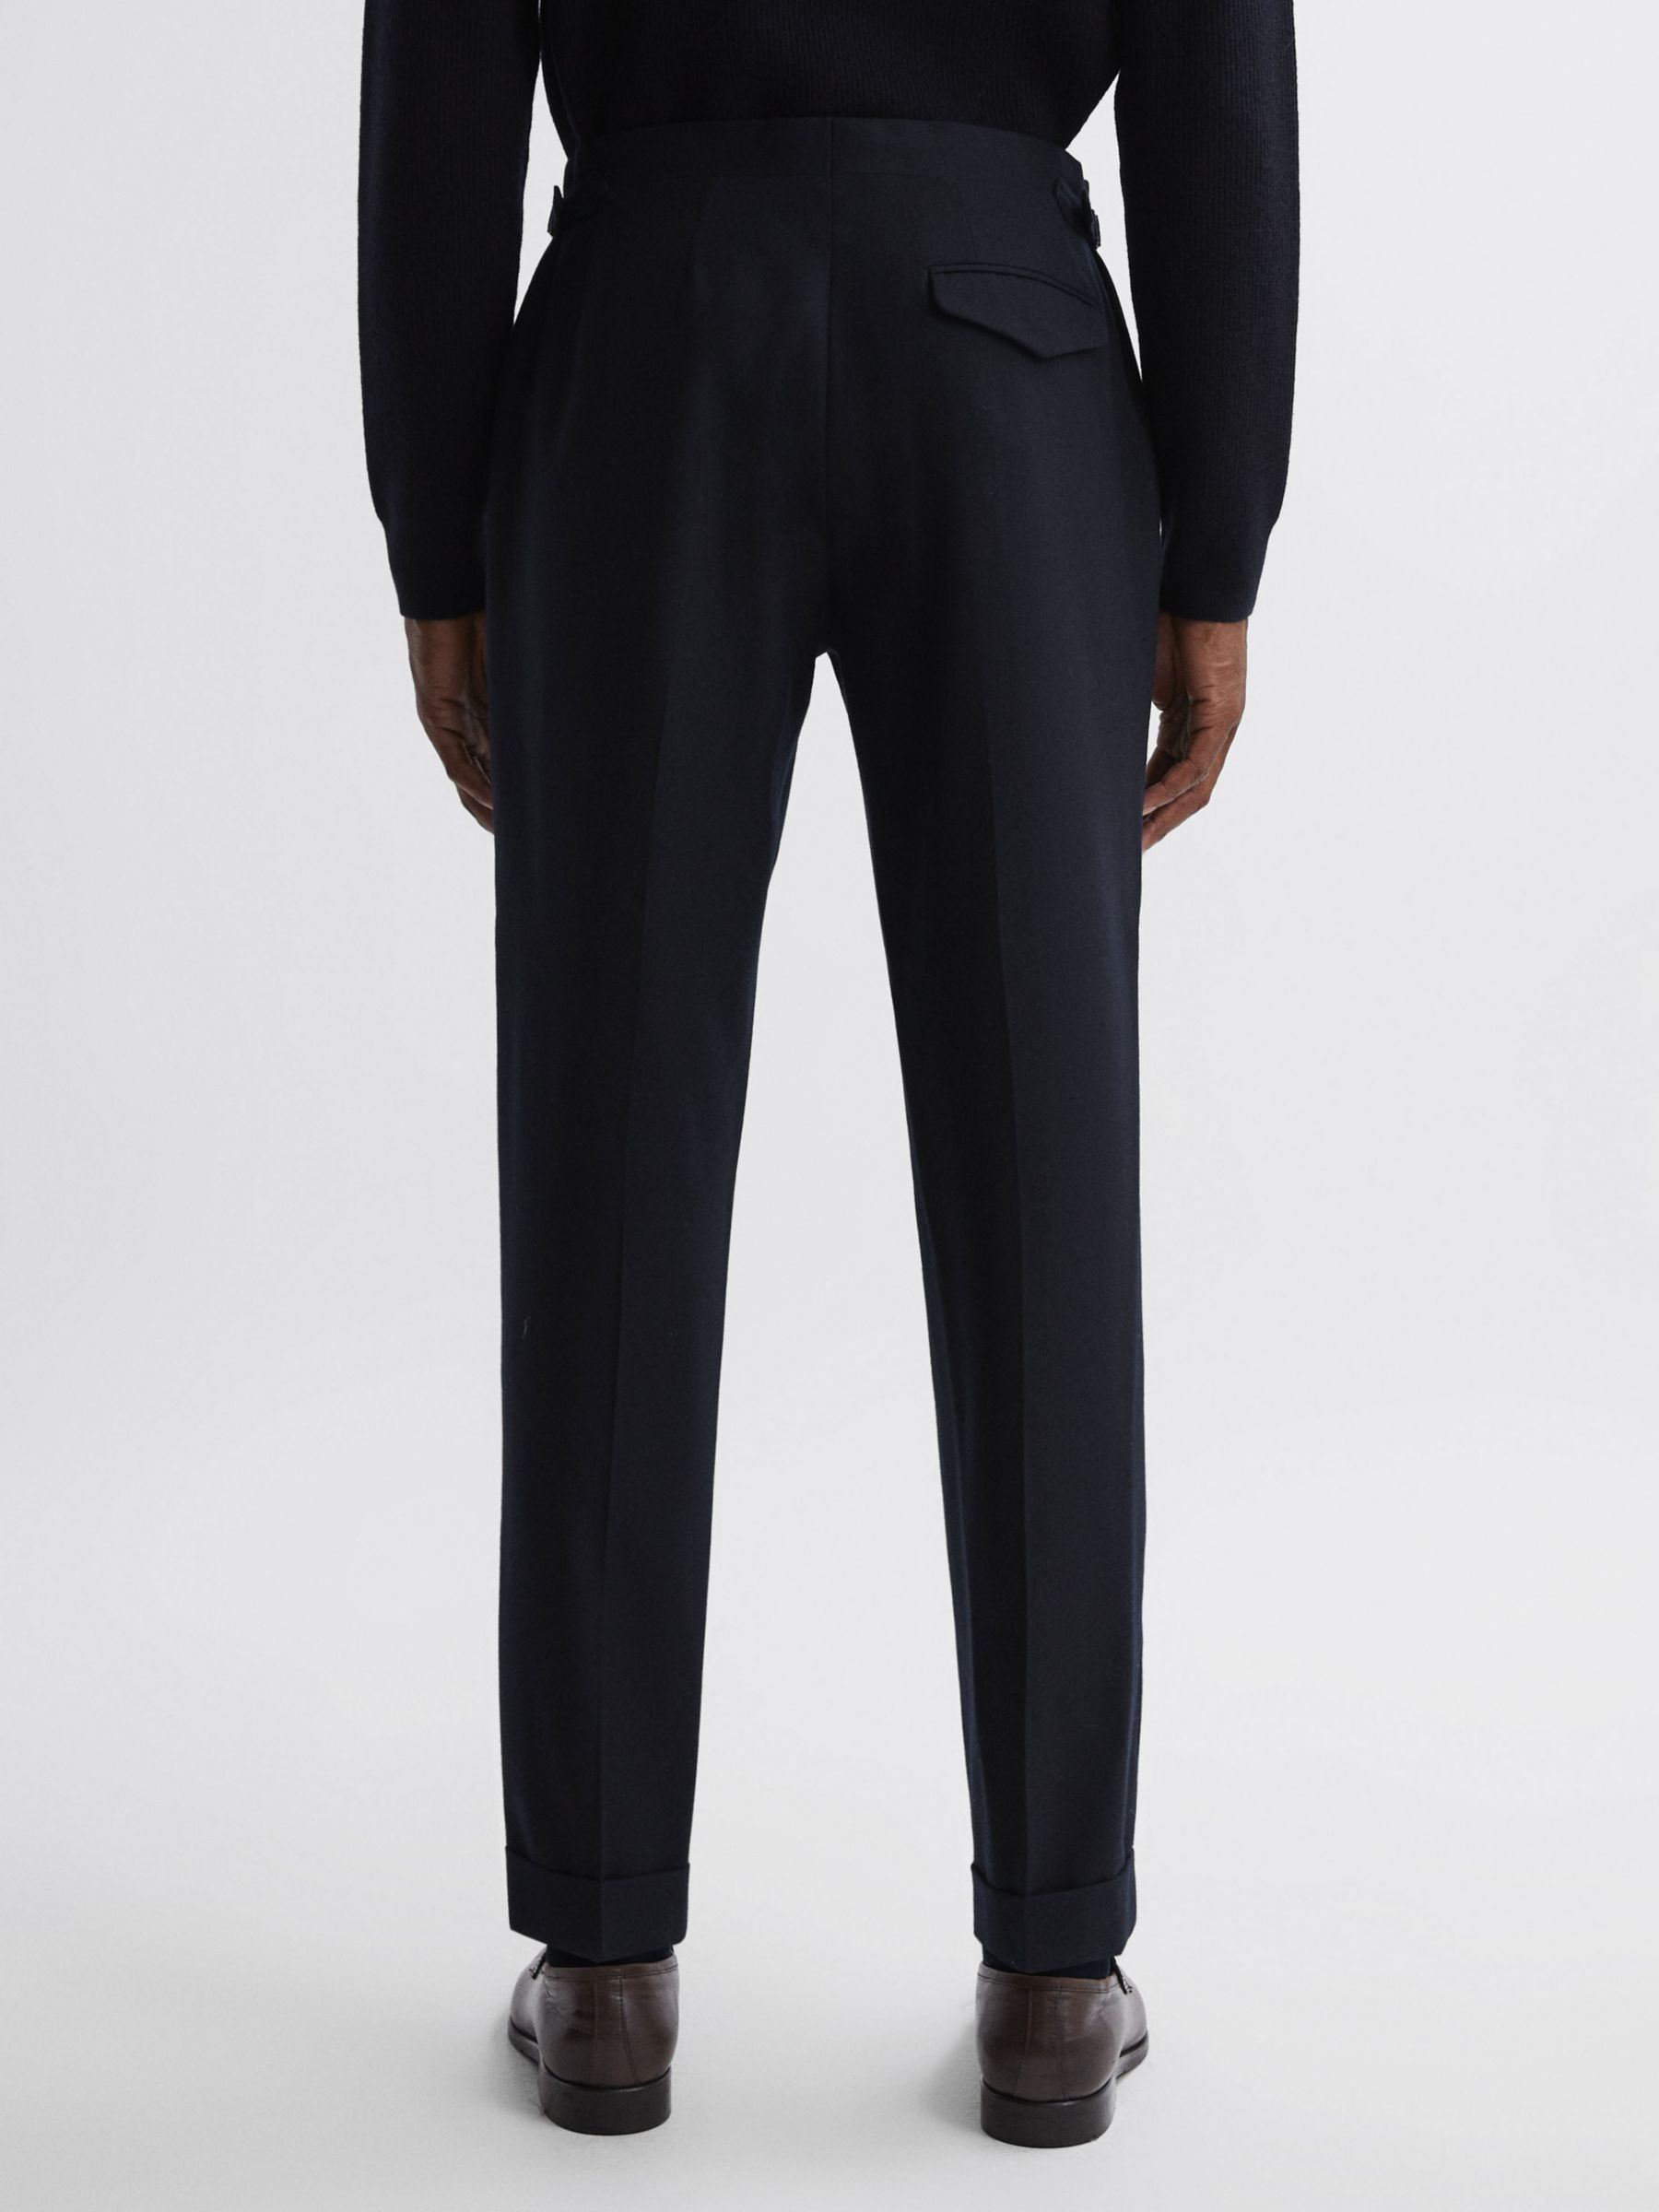 Reiss Beadnell Brushed Wool Trousers, Navy at John Lewis & Partners